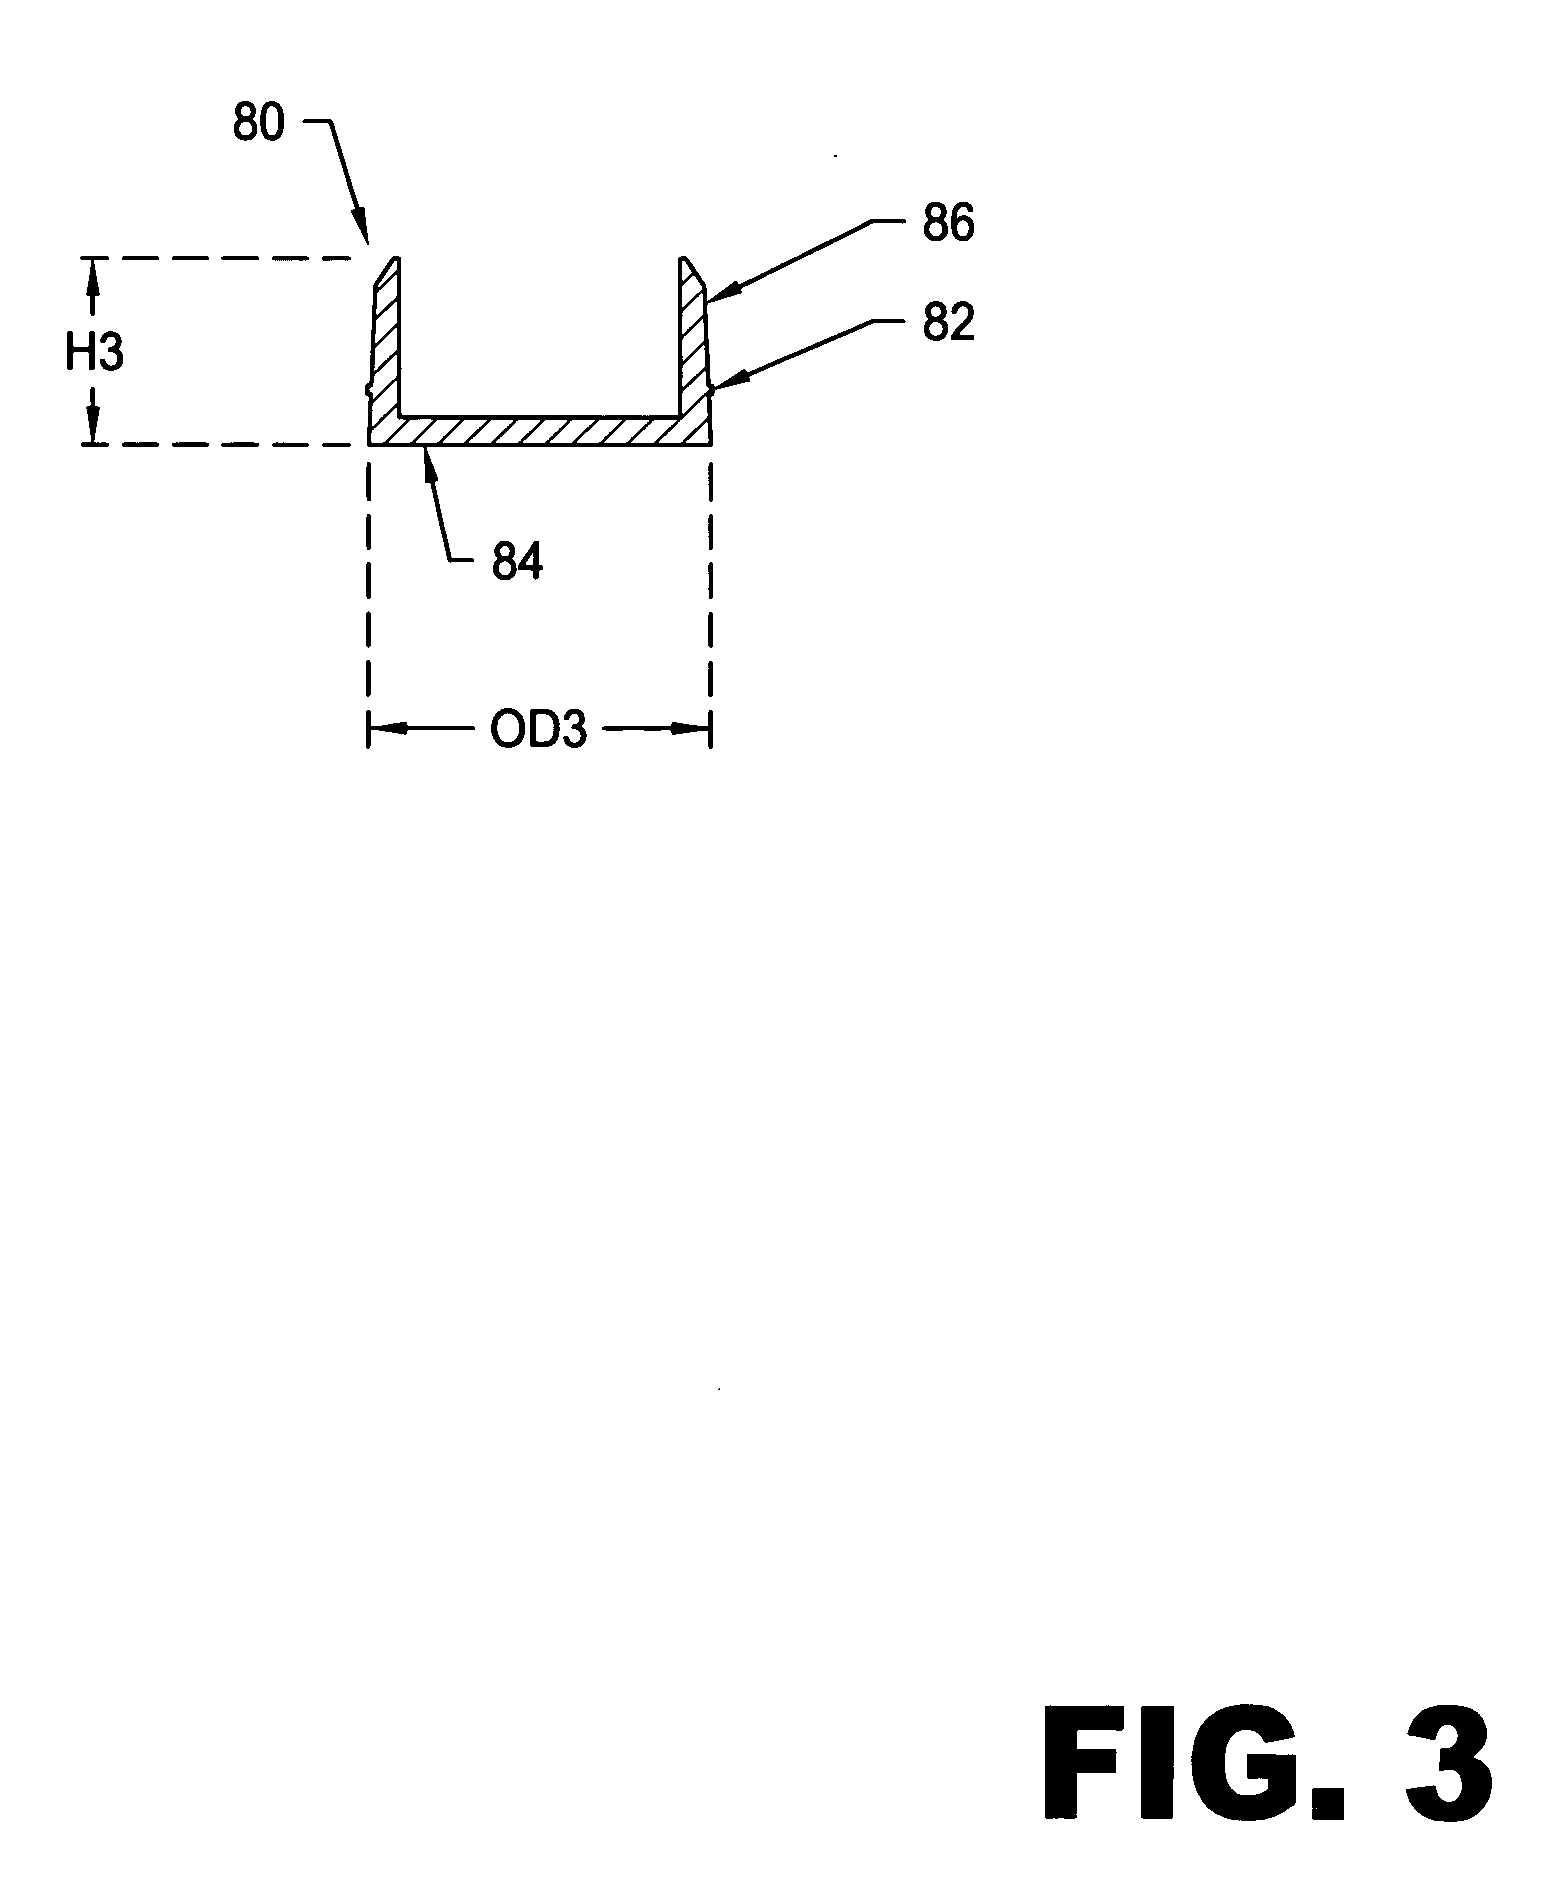 Methods and apparatus to prevent, treat, and cure the symptoms of nauea caused by chemotherapy treatments of human cancers